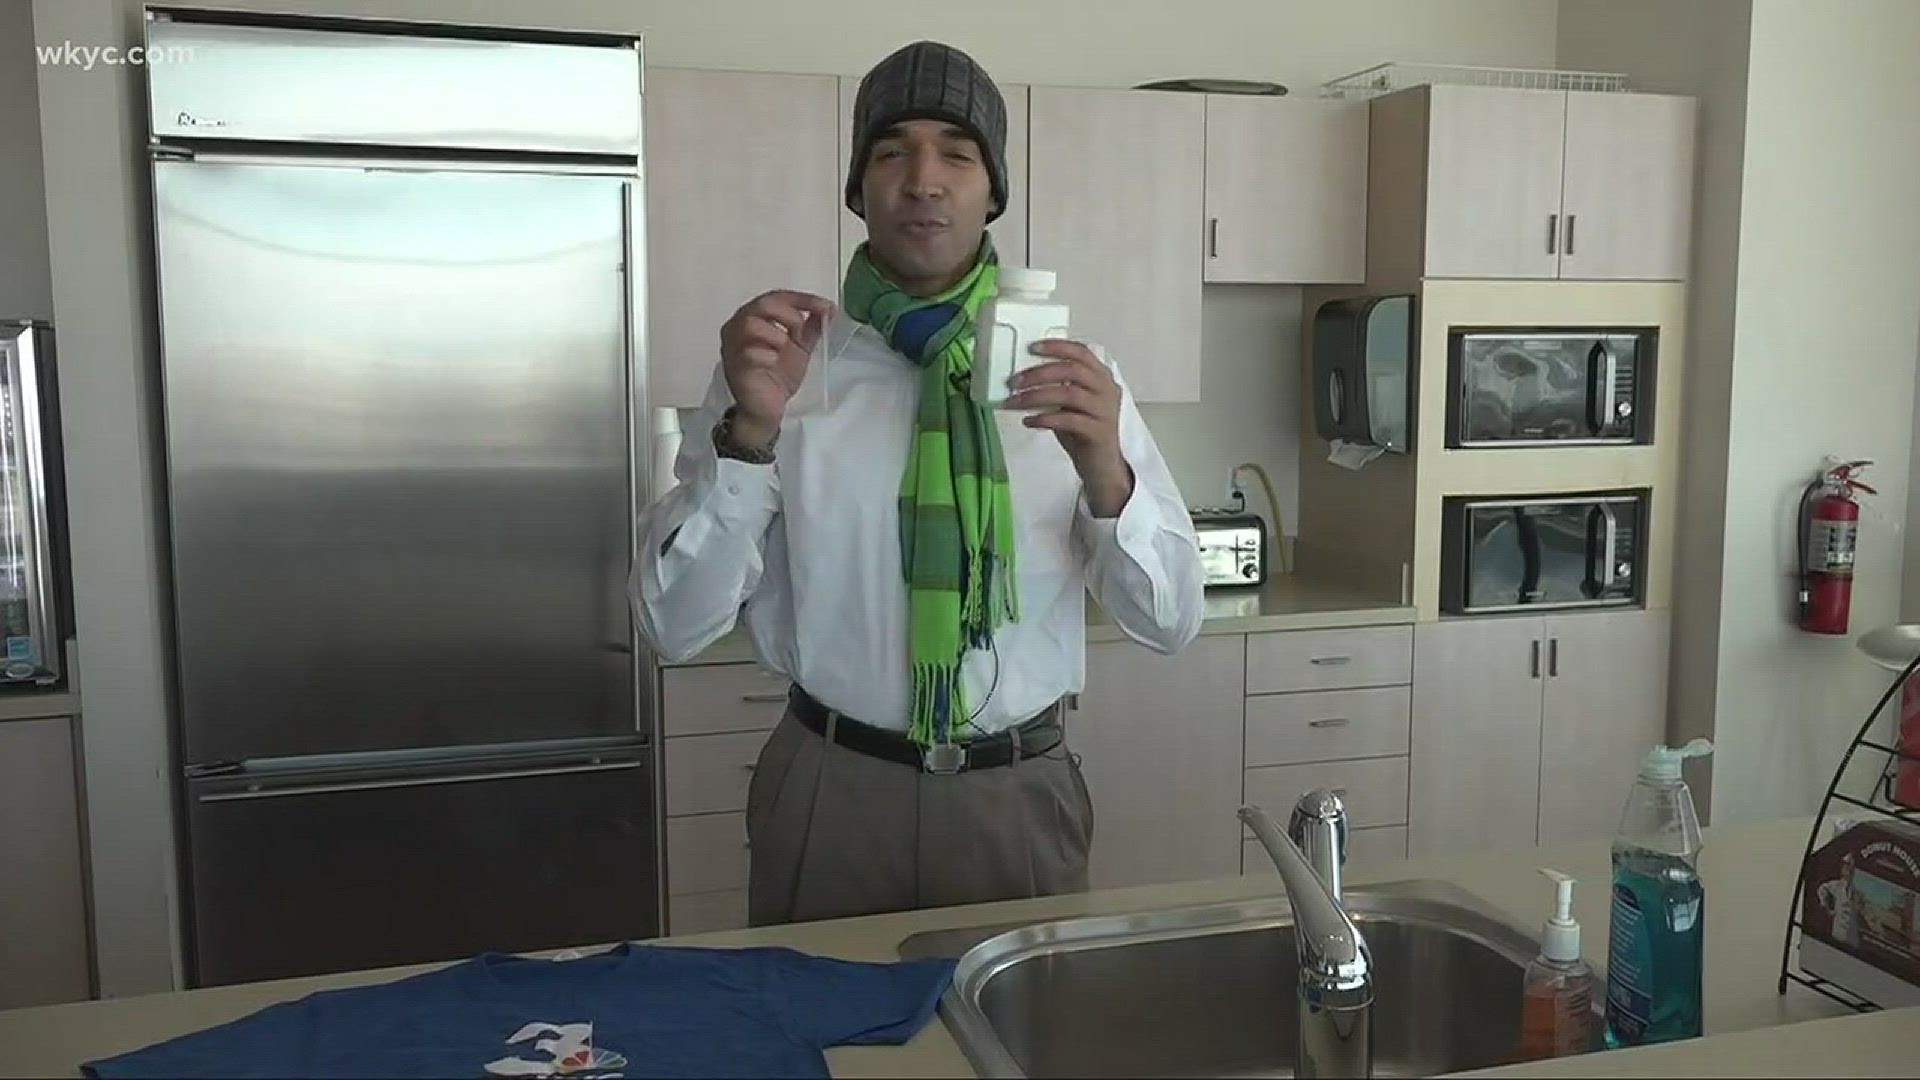 WKYC meteorologist Michael Estime shows some fun experiments to try in the cold weather.